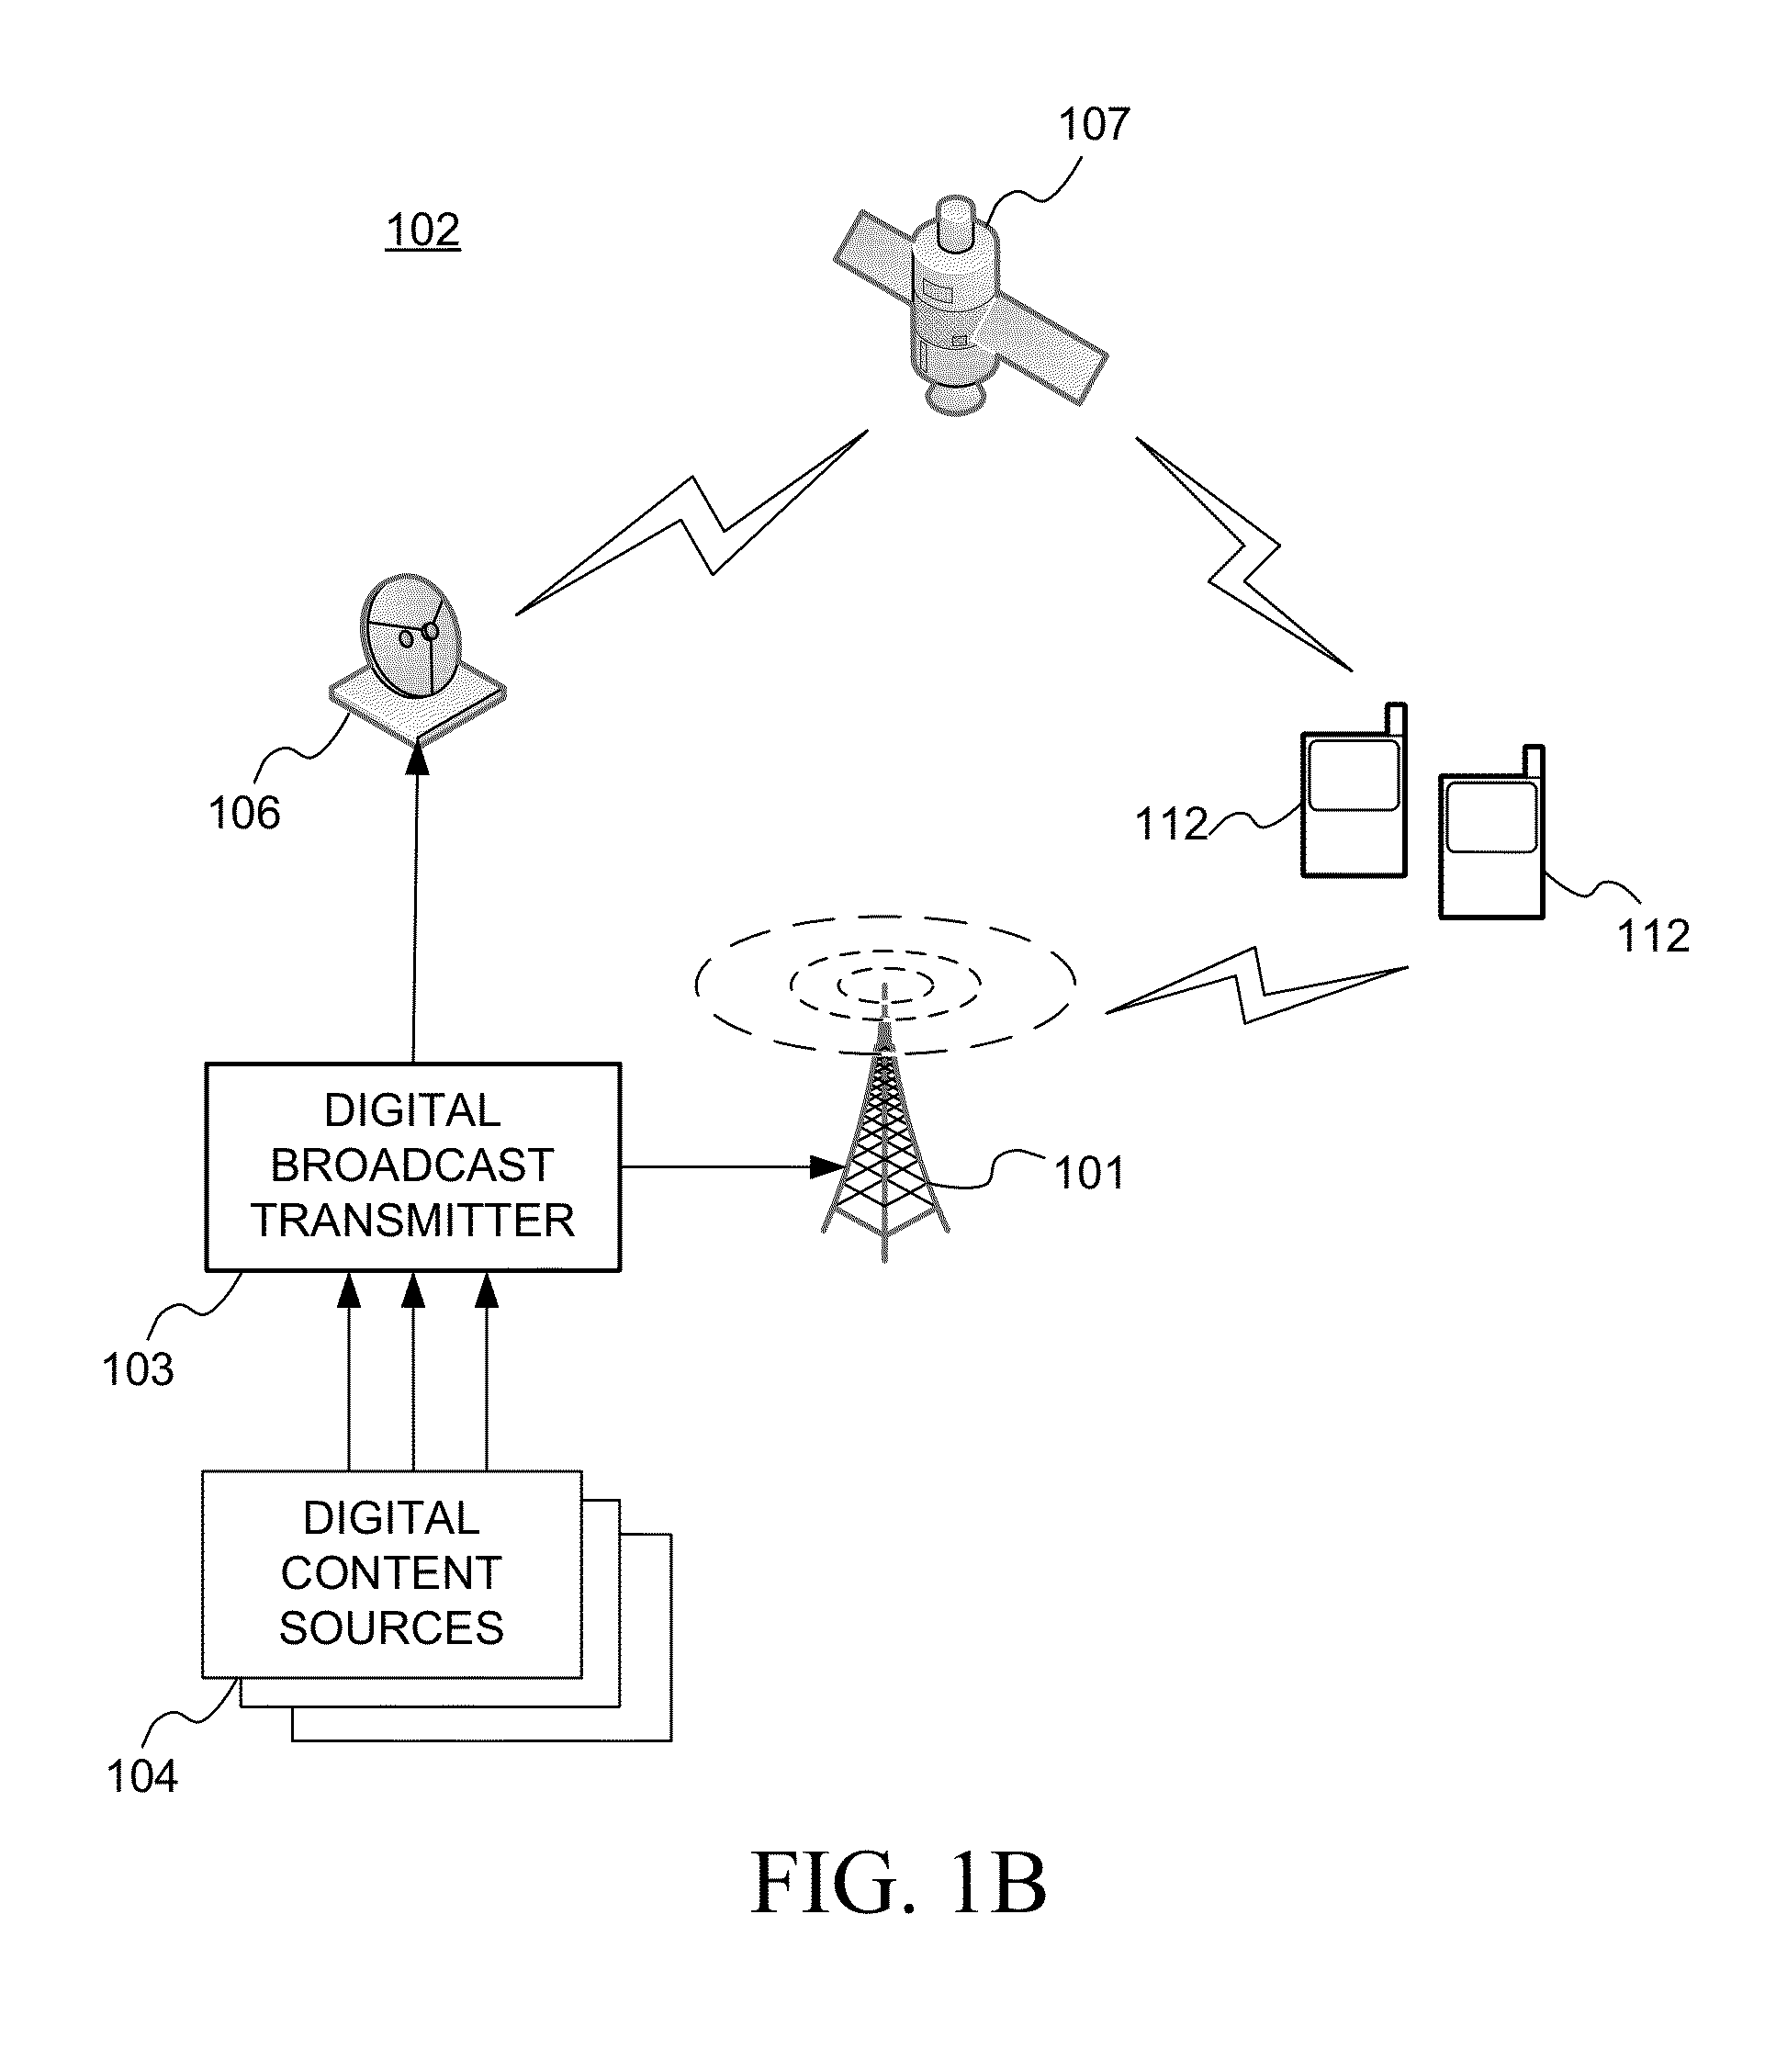 Method and System to Enable Handover in a Hybrid Terrestrial Satellite Network